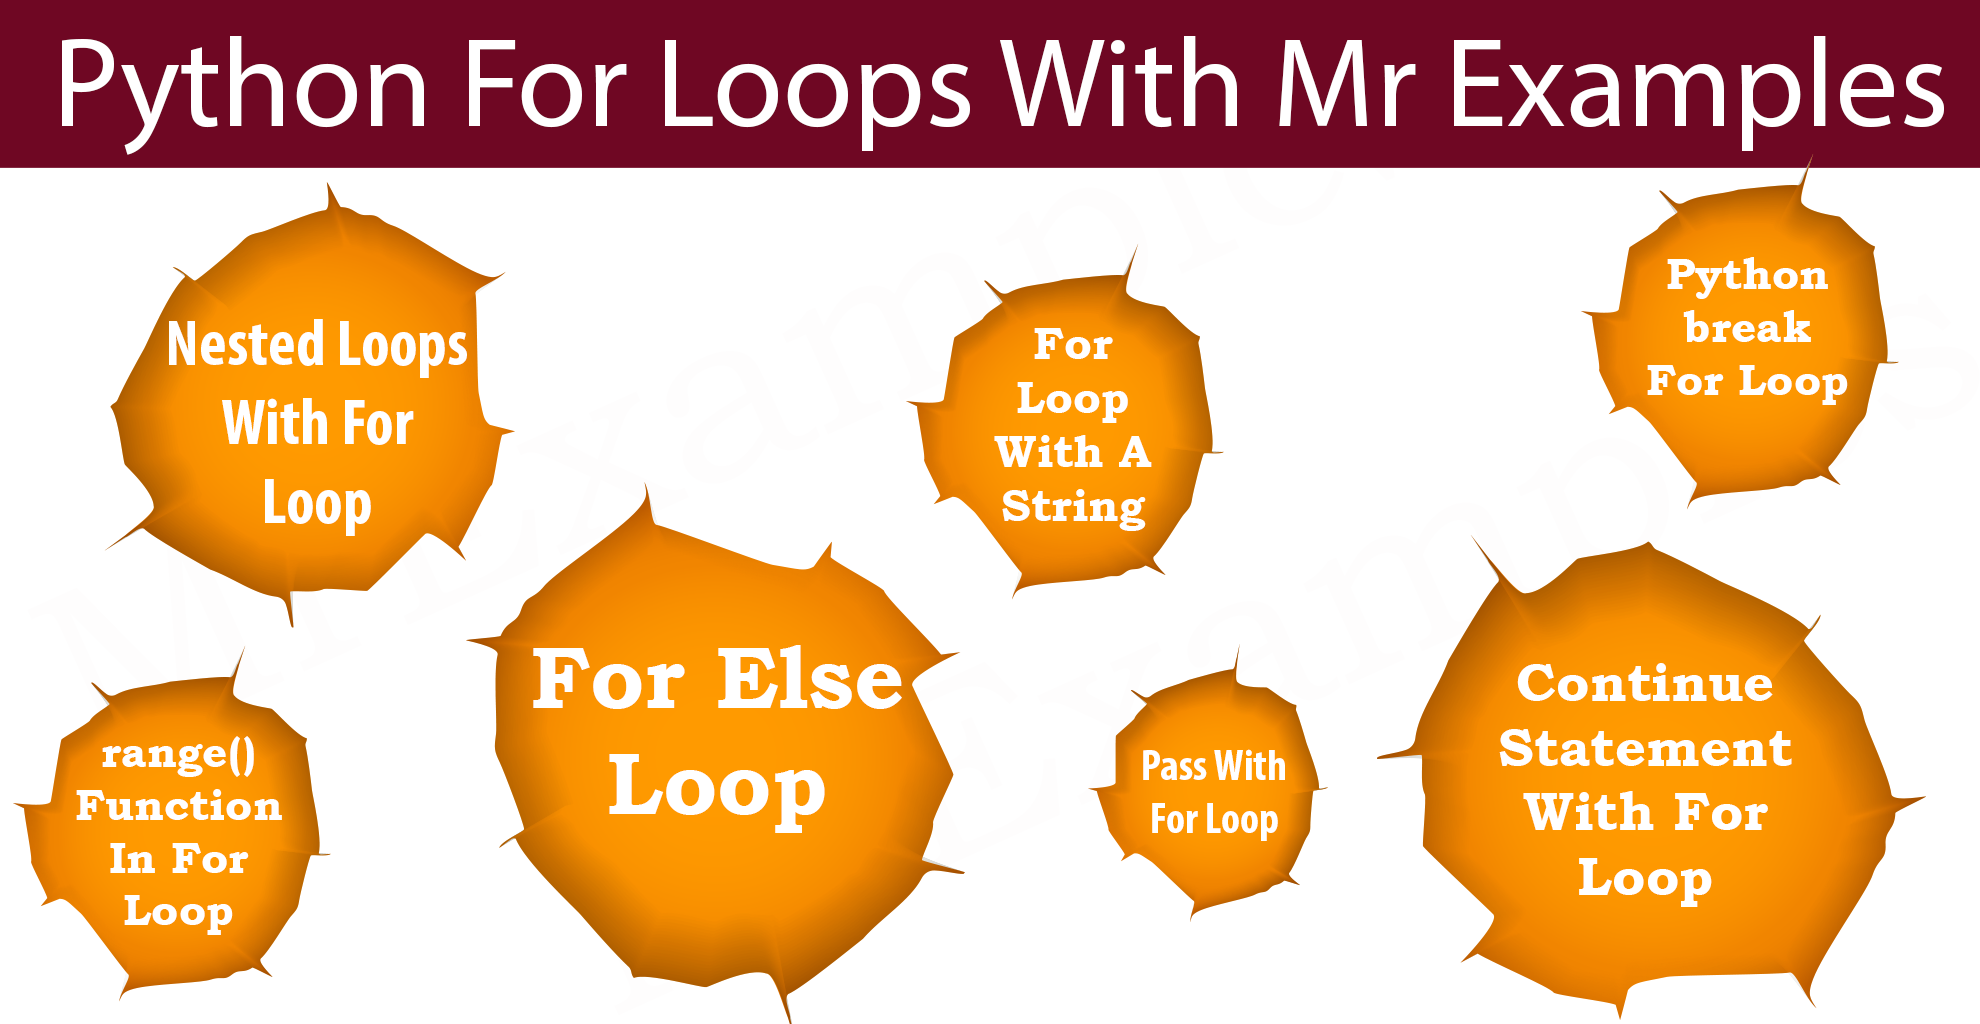 Python For Loops Examples - Mr Examples